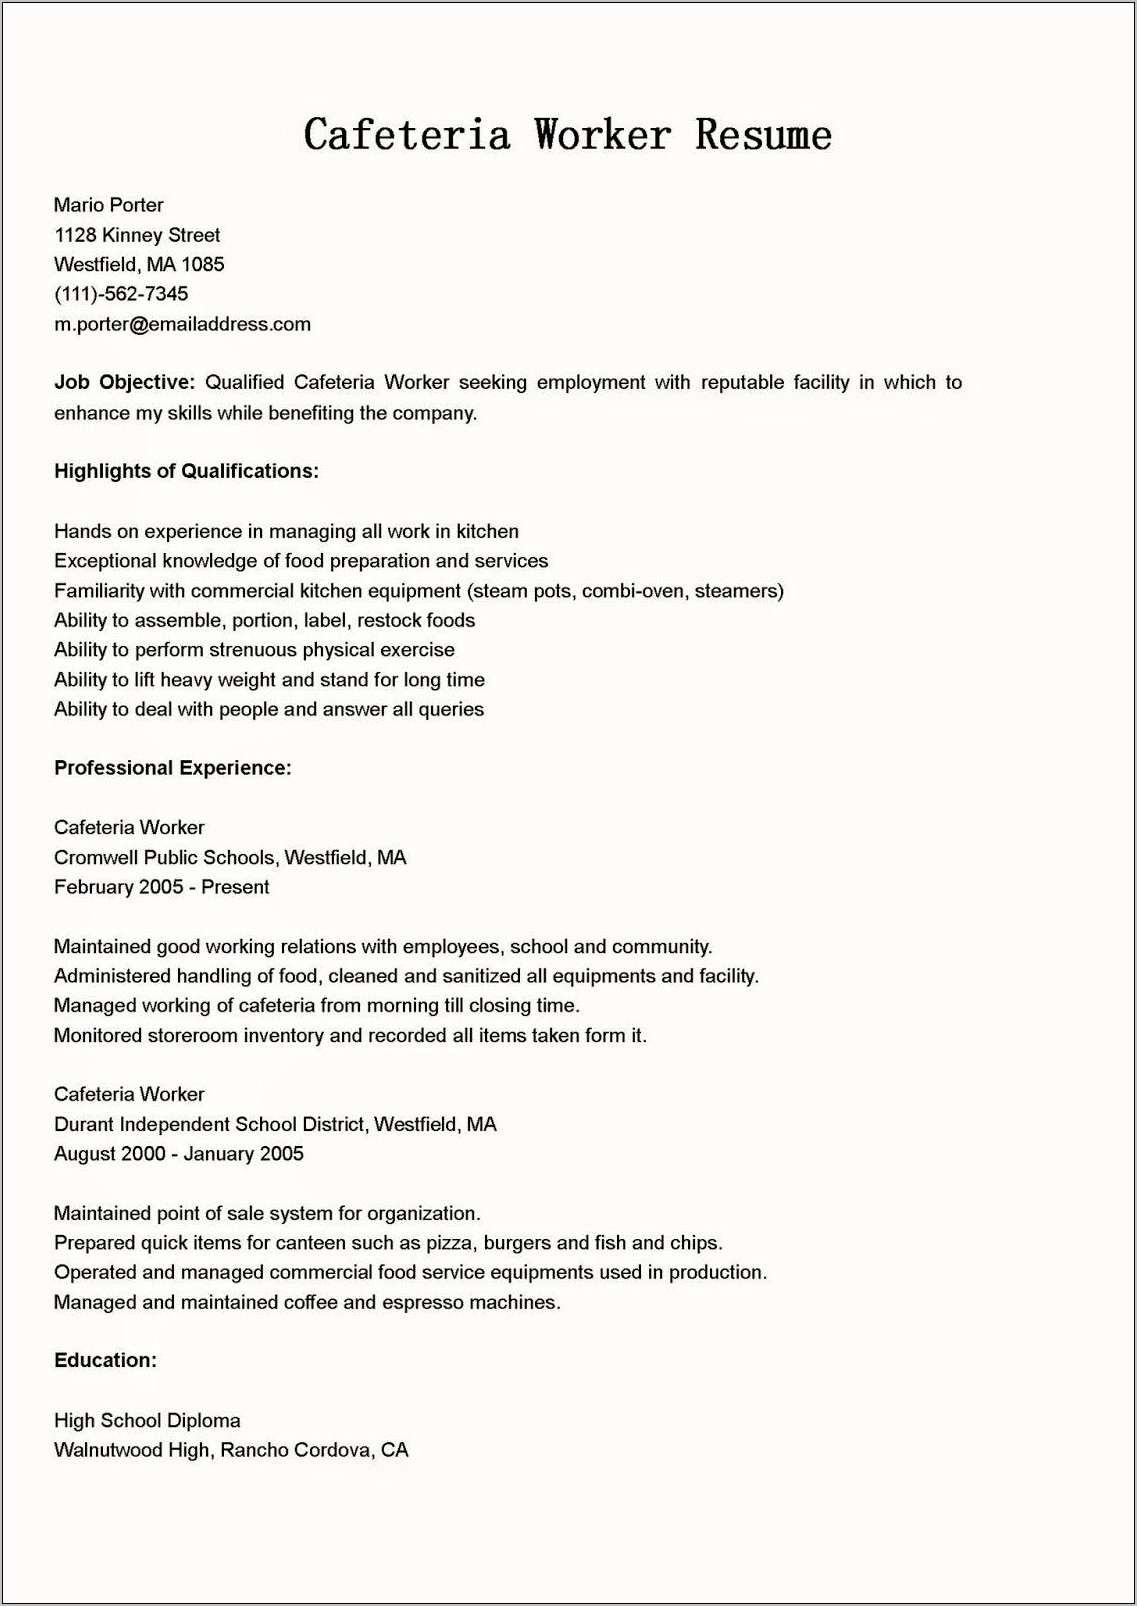 Resume Objective For A School Cafeteria Worker